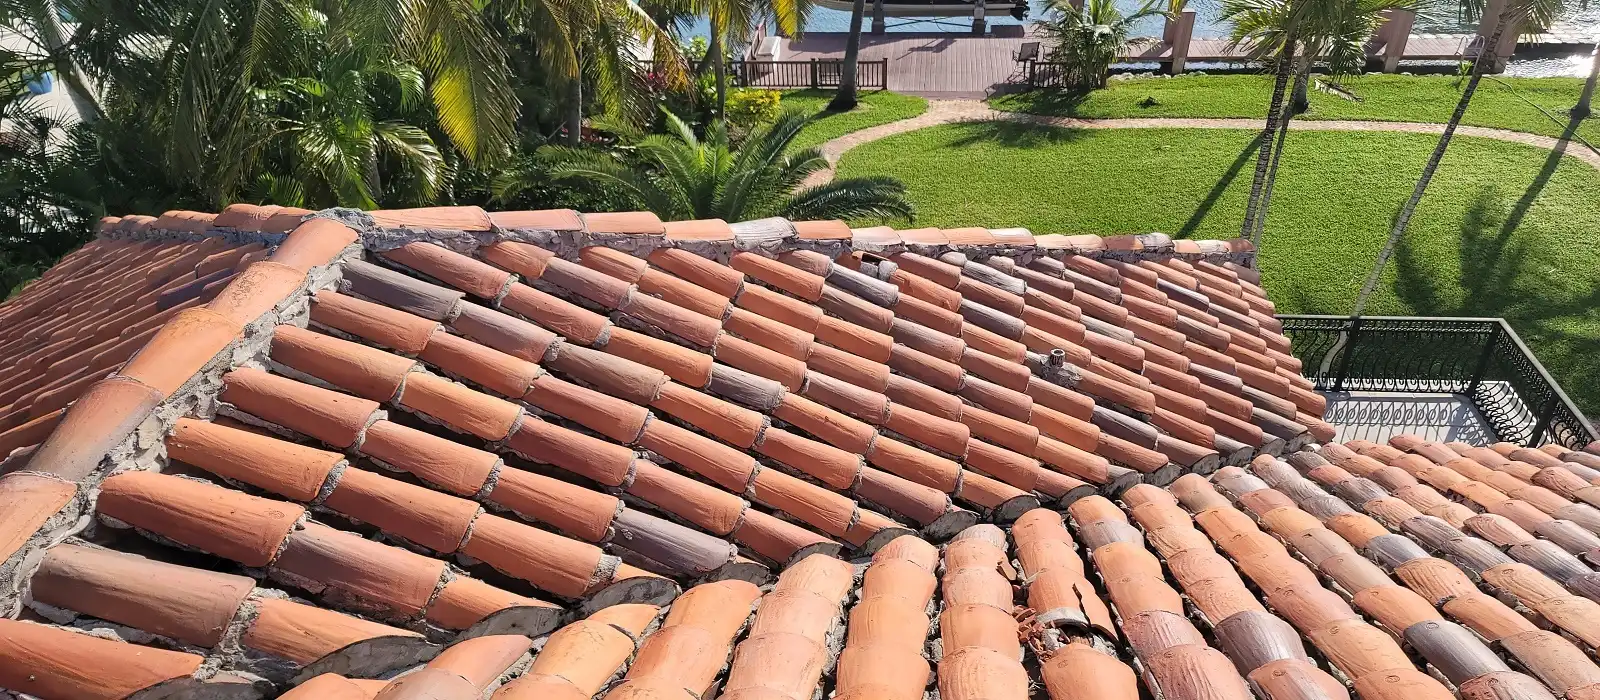 clay roof tiles-fort lauderdale-florida